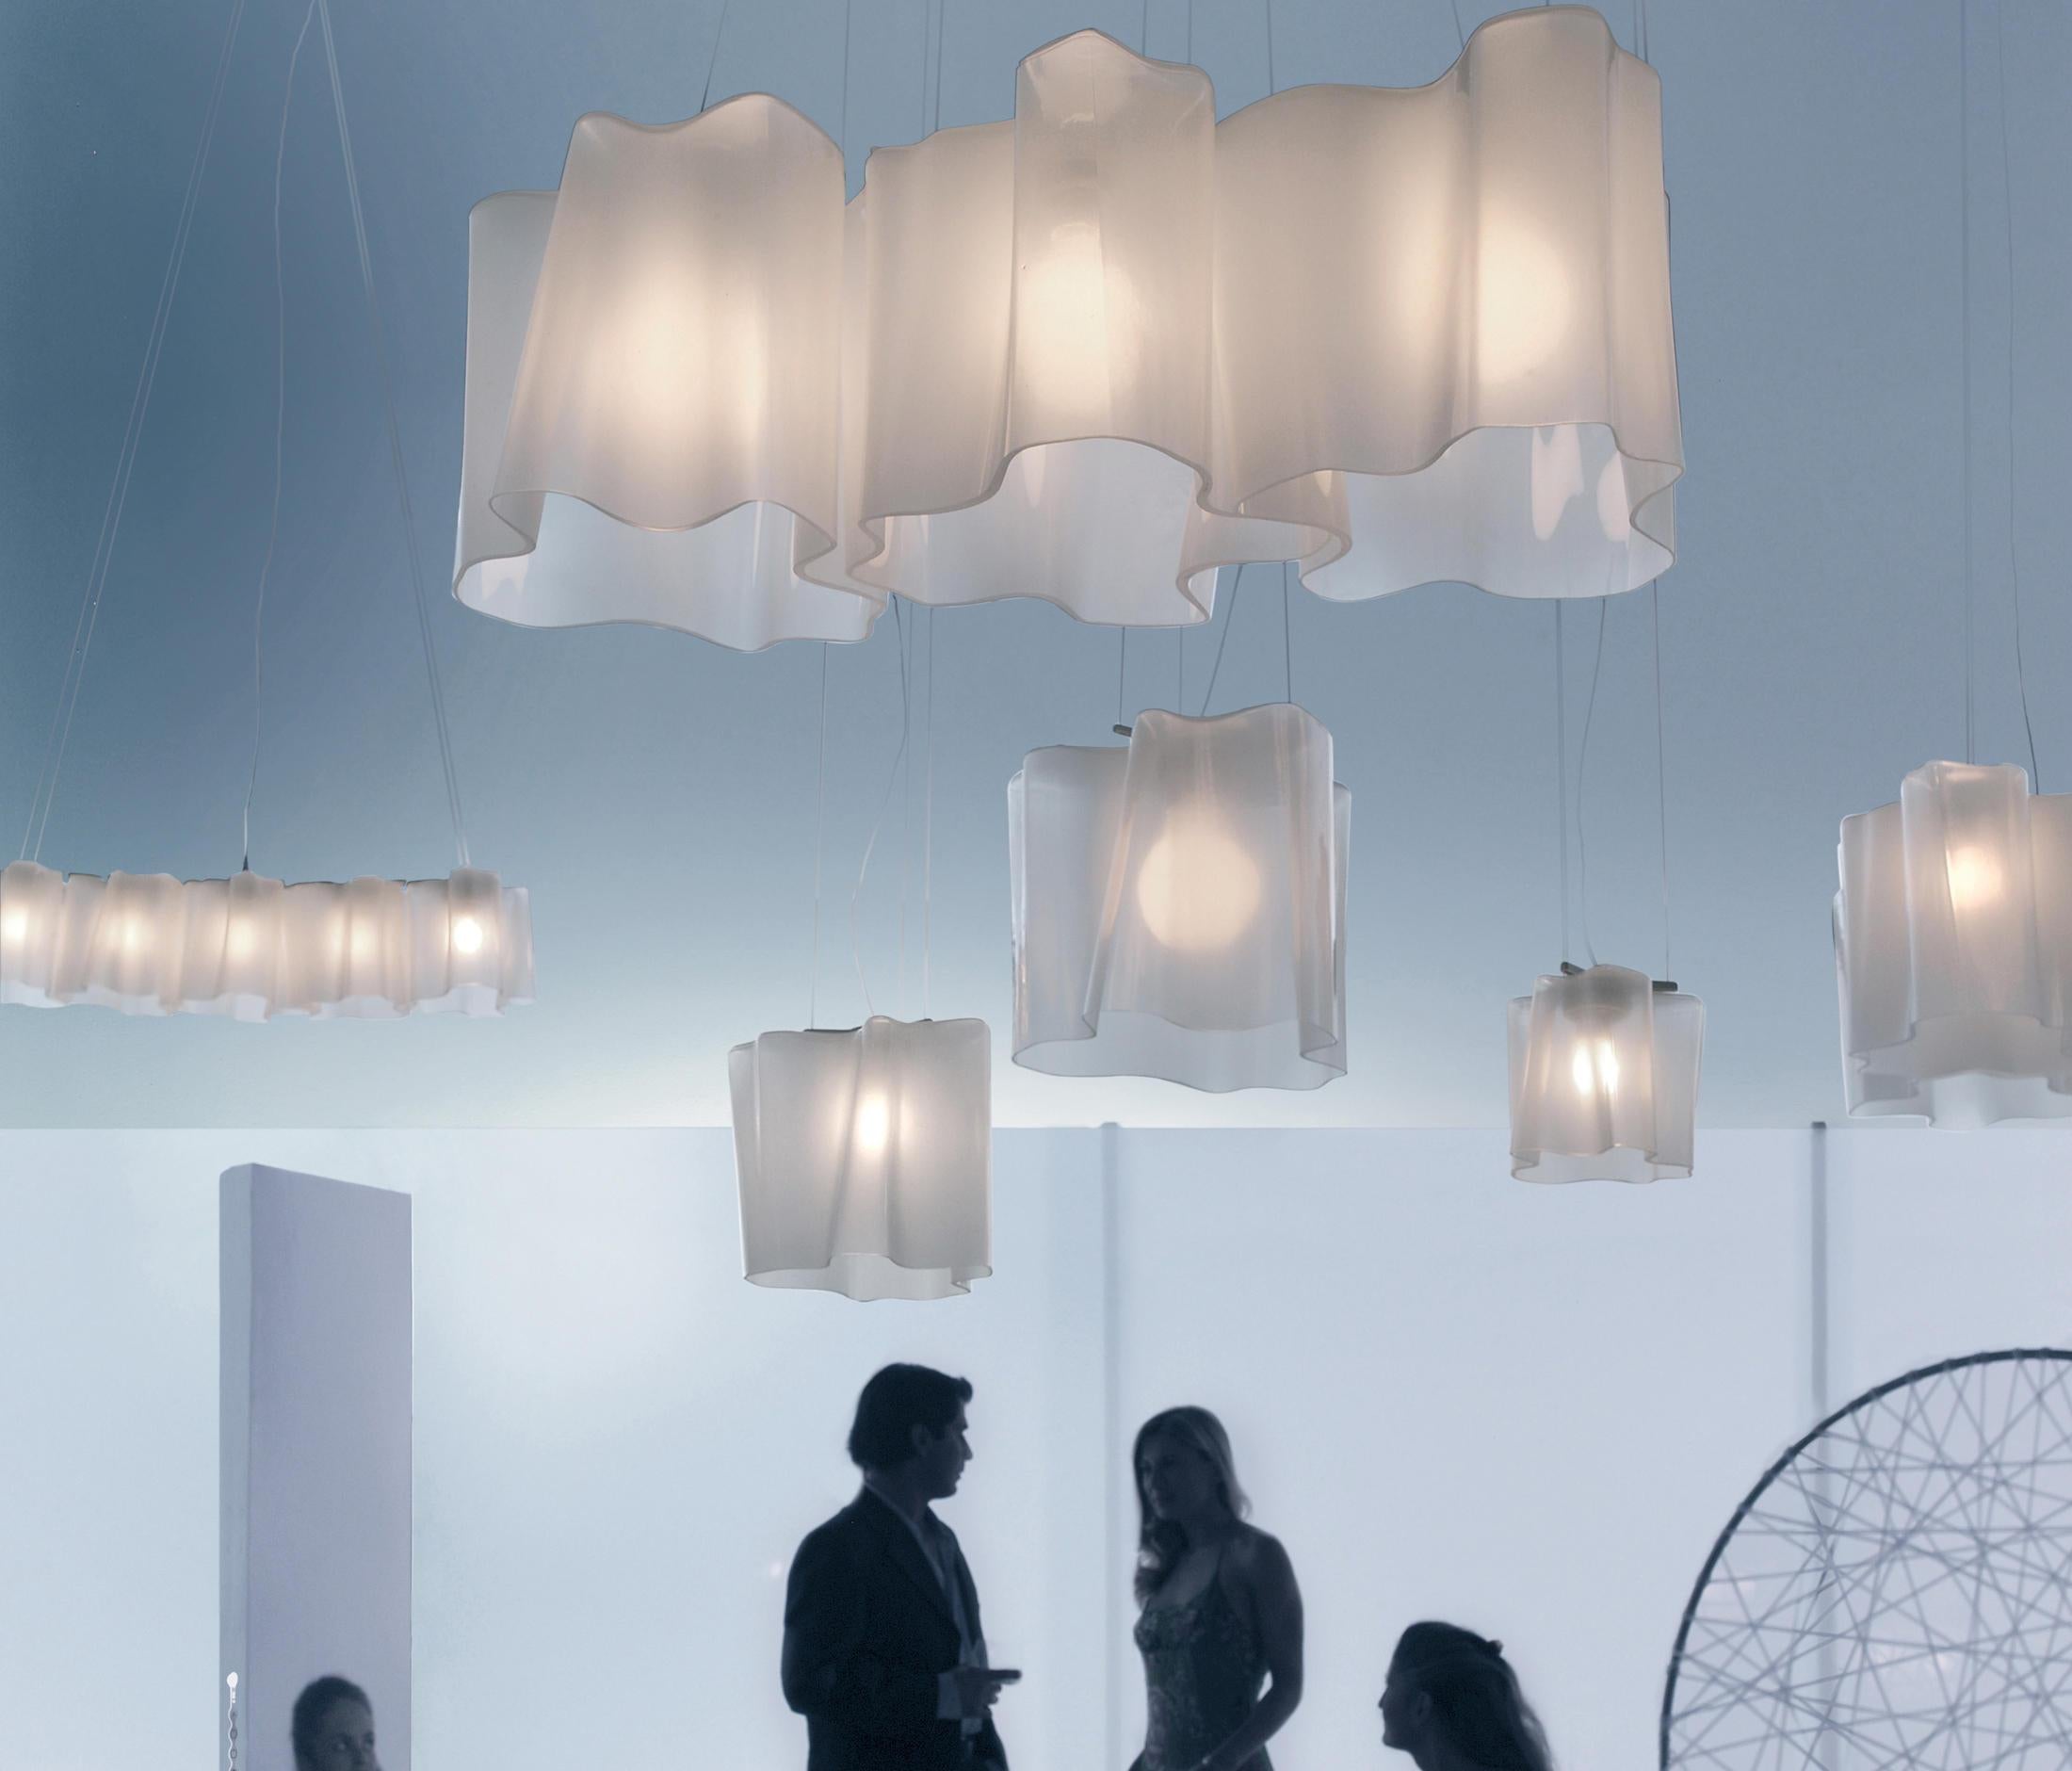 Logico triple nested suspension pendant in Smoke & Pale Grey for Artemide. 

Inspired by rays of light as they diffuse through the atmosphere, Logico’s blown-glass diffuser takes an organic shape that delivers a soft, ambient light. The diffuser is